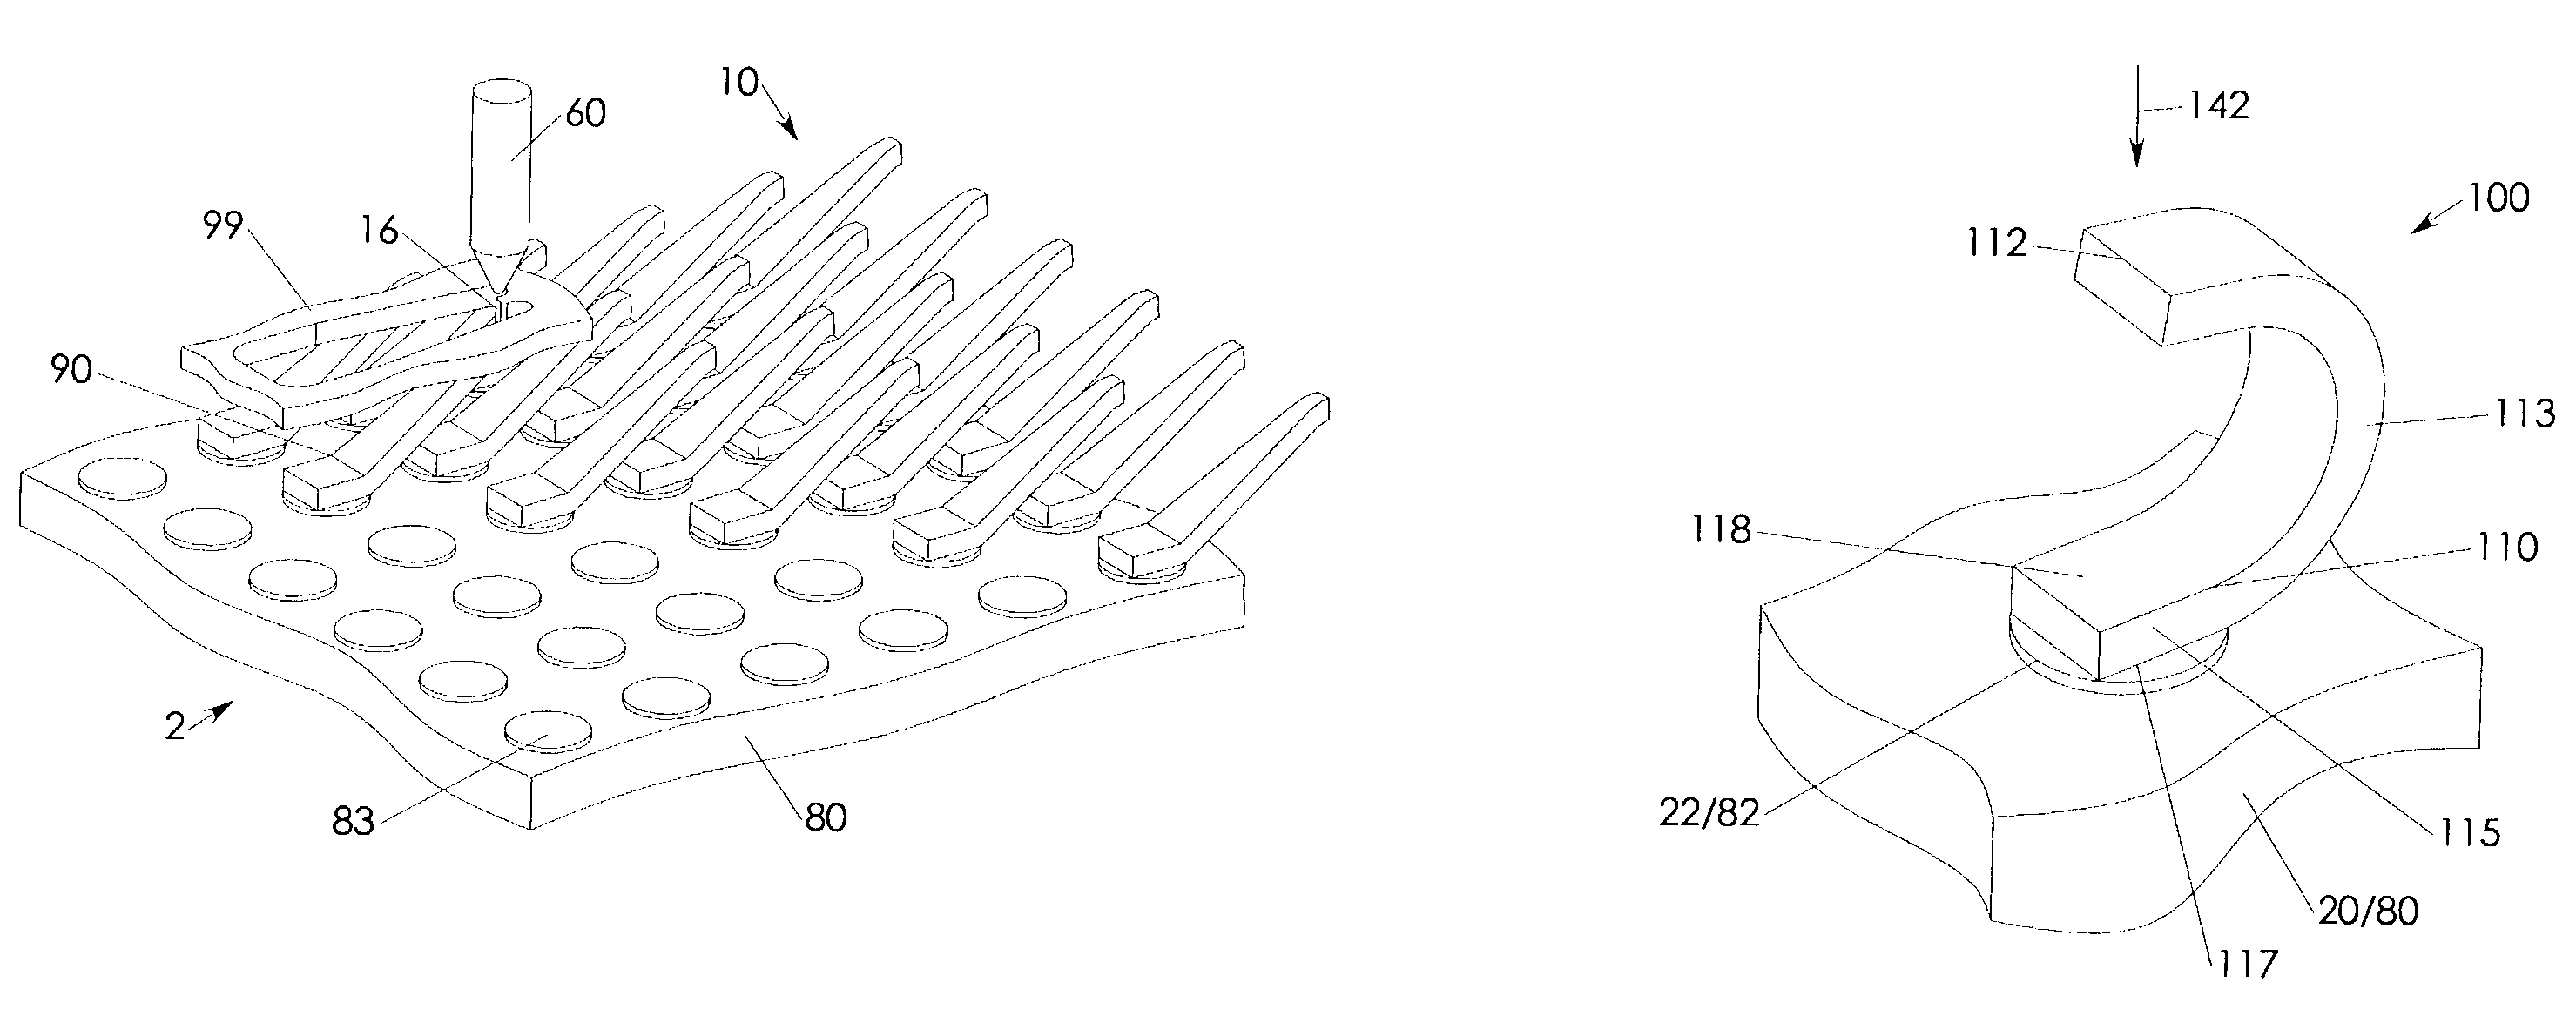 Prefabricated and attached interconnect structure